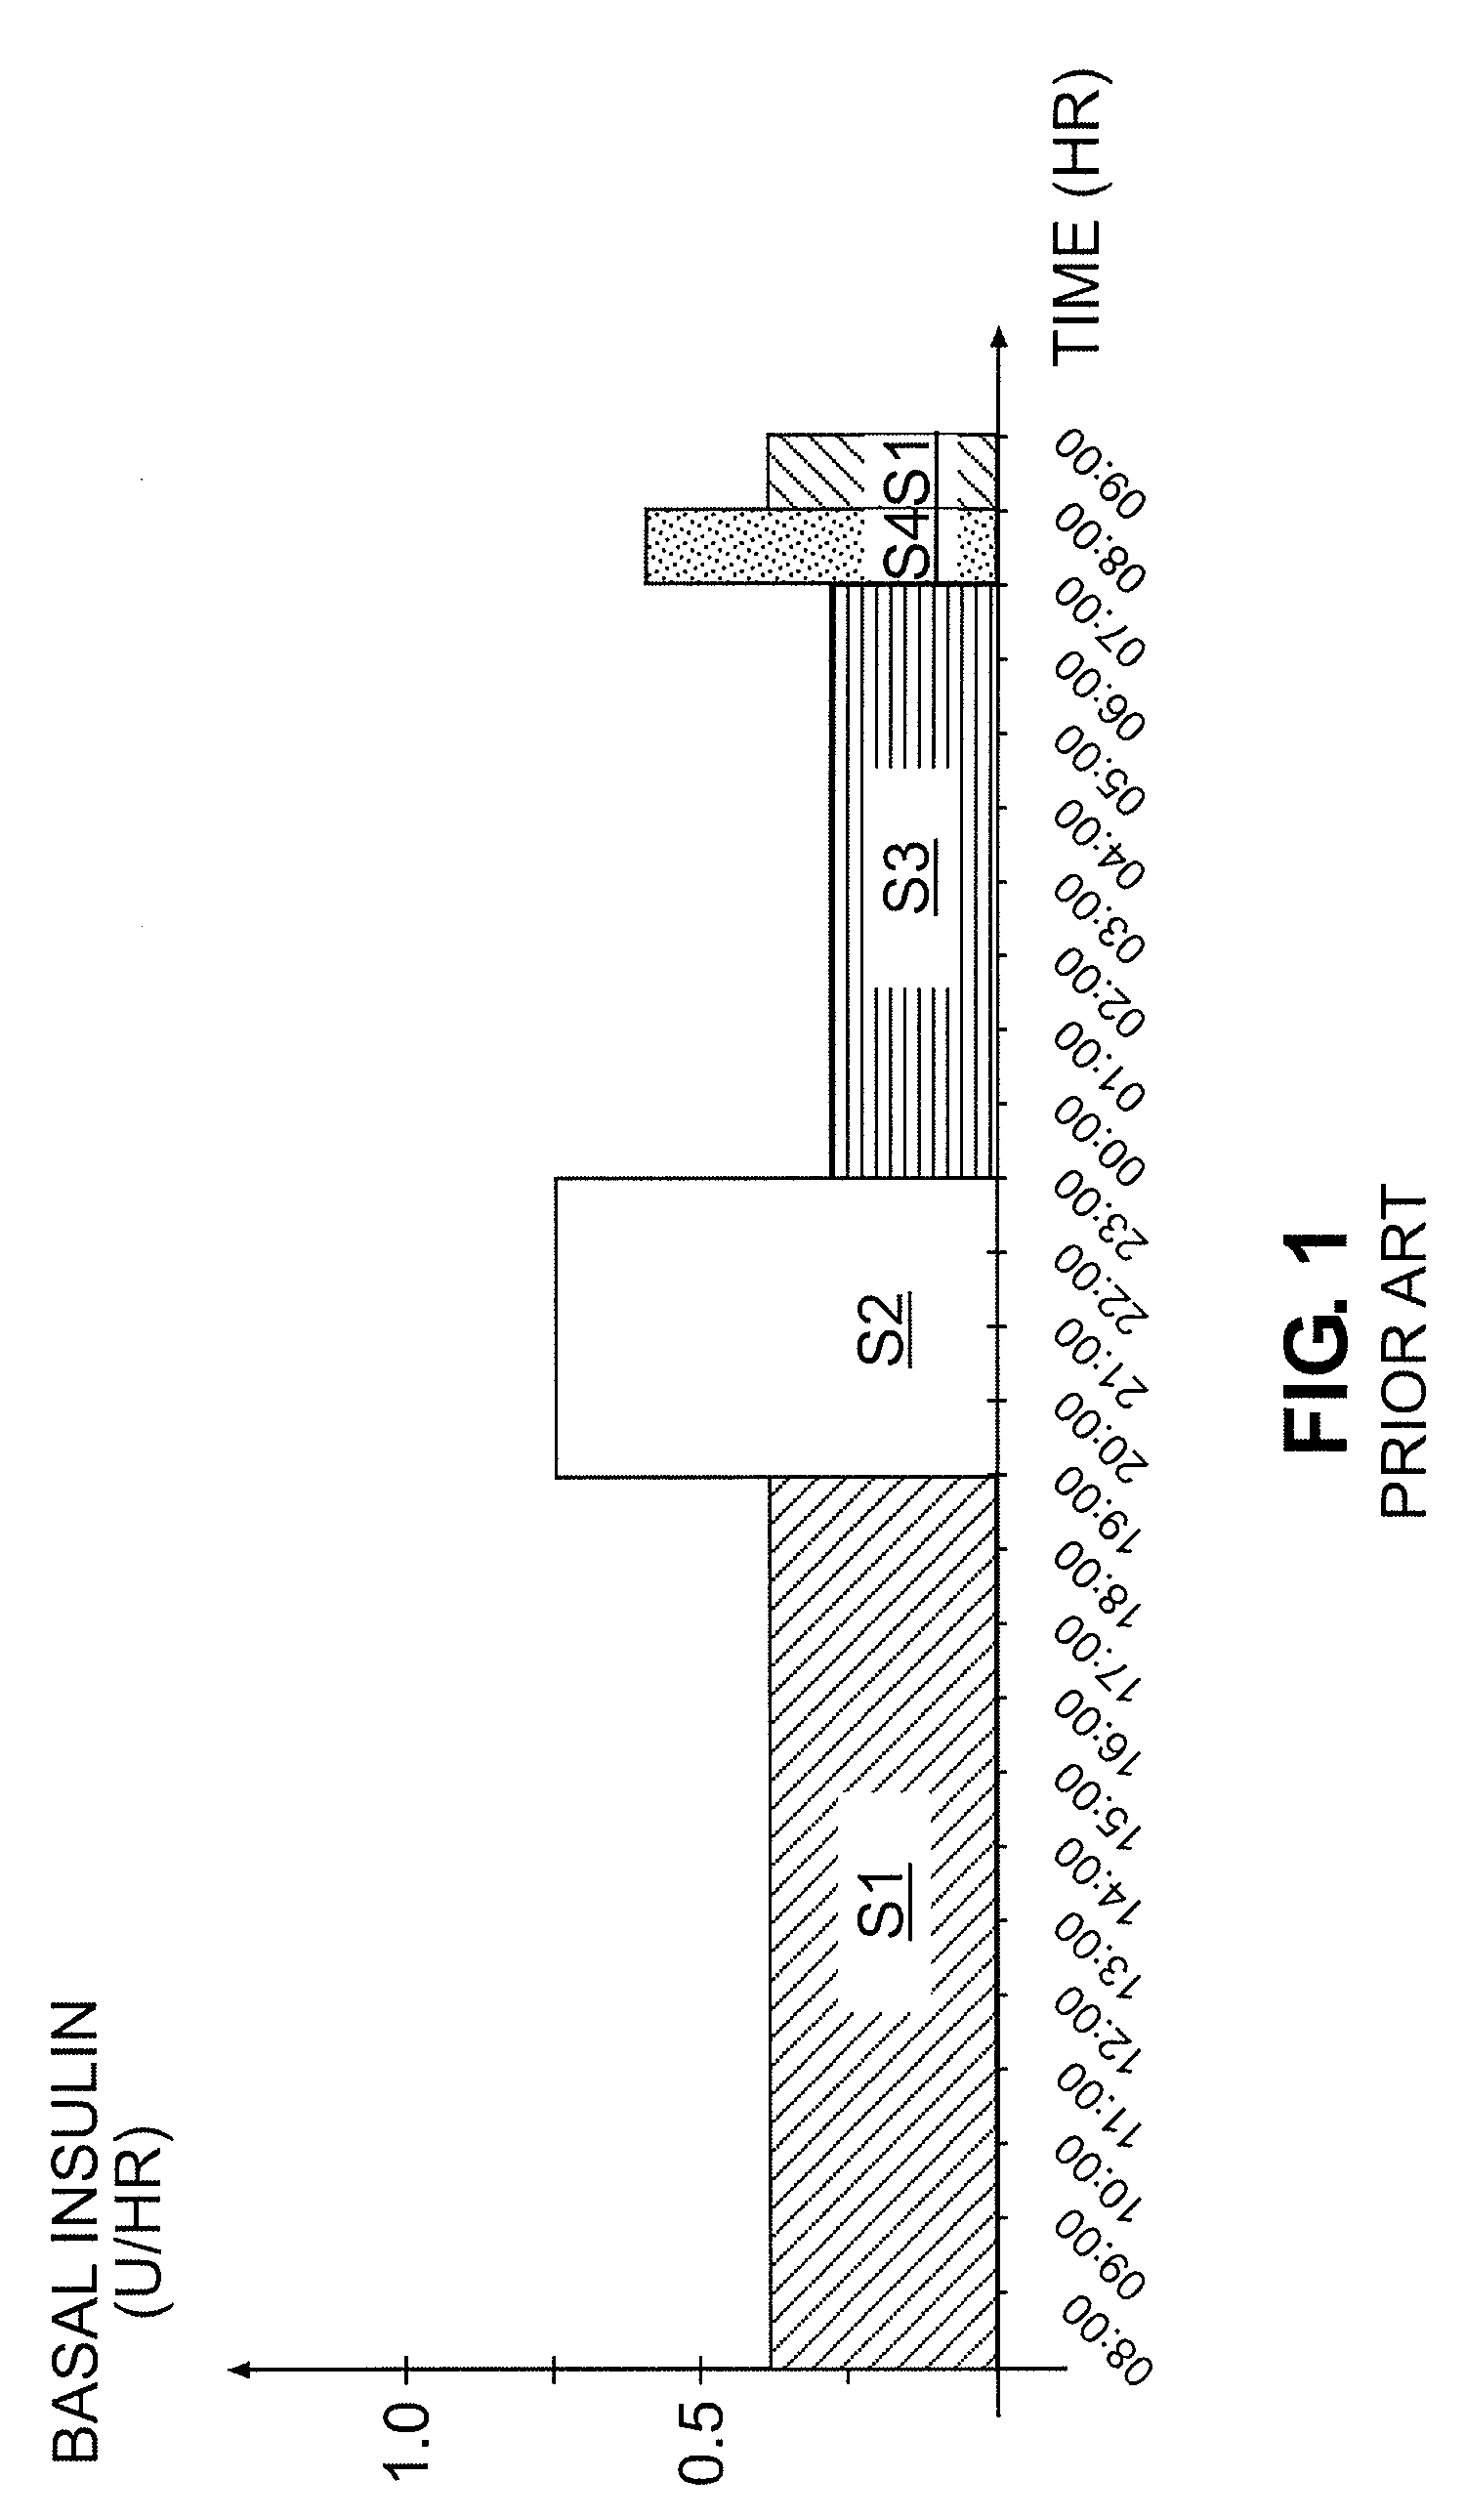 Tailored basal insulin delivery system and method